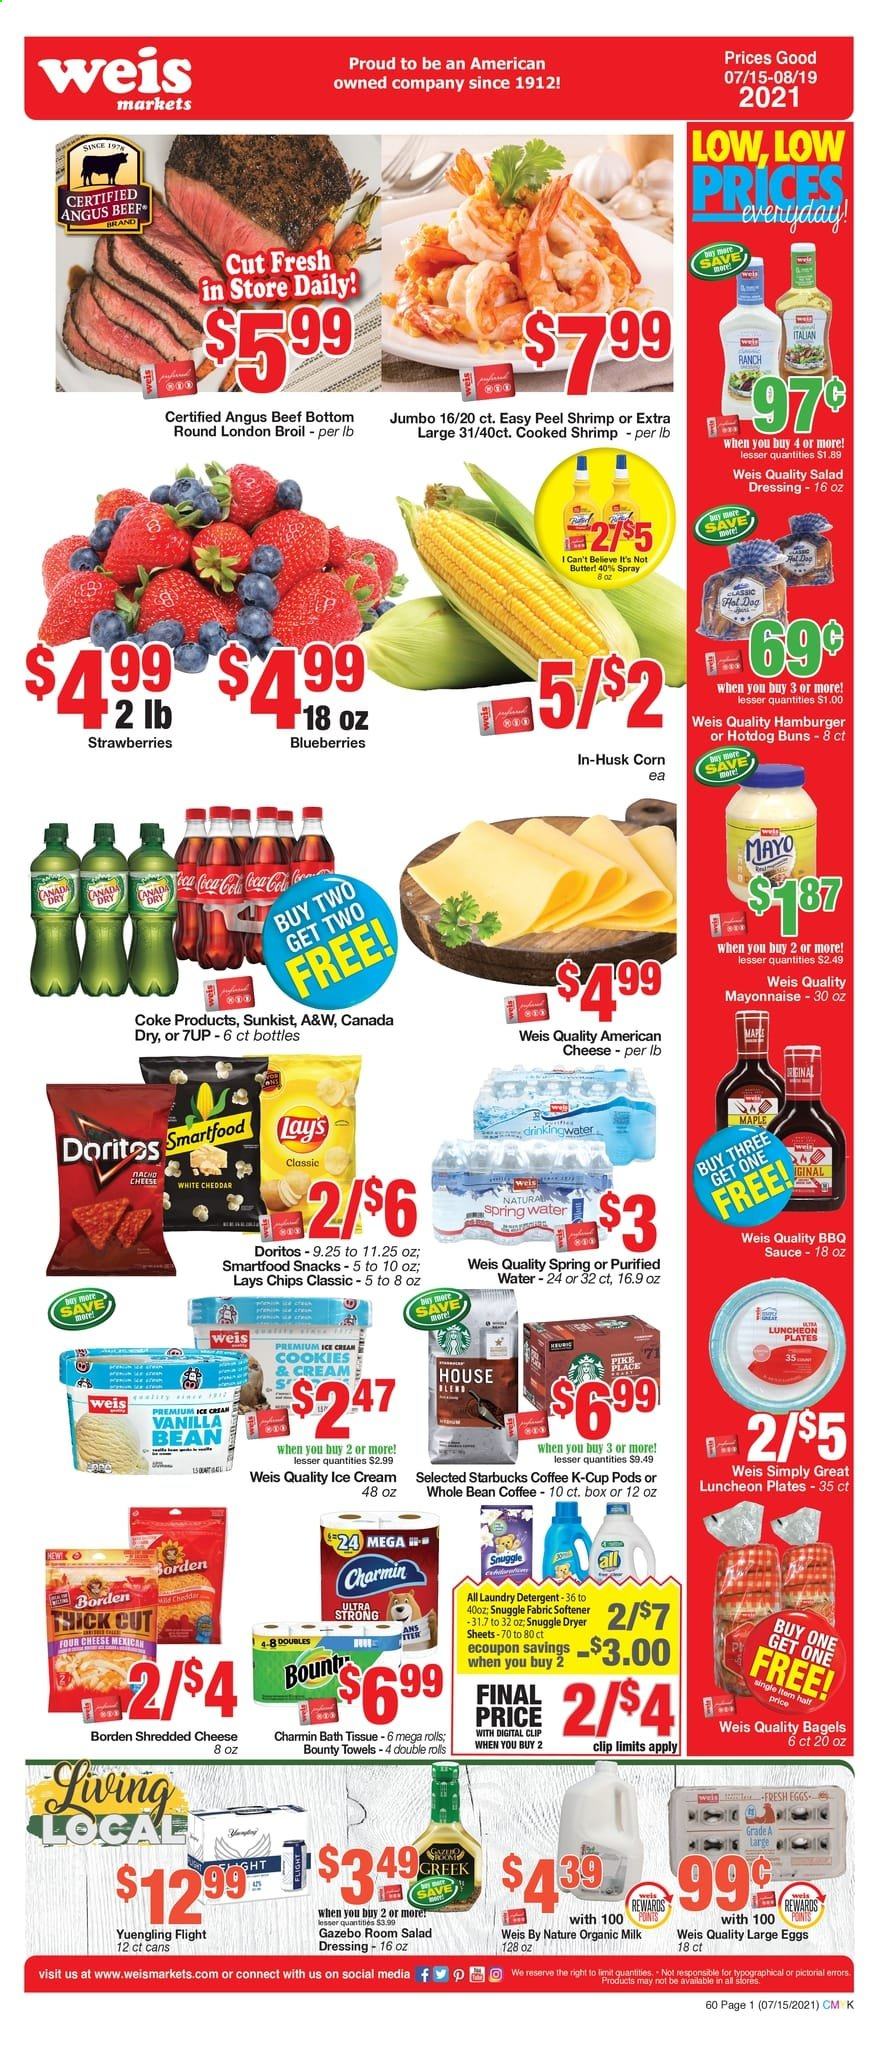 thumbnail - Weis Flyer - 07/15/2021 - 08/19/2021 - Sales products - Yuengling, bagels, hot dog rolls, buns, corn, blueberries, strawberries, beef meat, hamburger, shrimps, sauce, lunch meat, american cheese, shredded cheese, organic milk, large eggs, butter, I Can't Believe It's Not Butter, mayonnaise, ice cream, cookies, snack, Bounty, Doritos, chips, Lay’s, Smartfood, BBQ sauce, salad dressing, dressing, Canada Dry, Coca-Cola, 7UP, A&W, spring water, purified water, coffee, Starbucks, coffee capsules, K-Cups, beer, bath tissue, Charmin, detergent, Snuggle, fabric softener, laundry detergent, plate. Page 1.